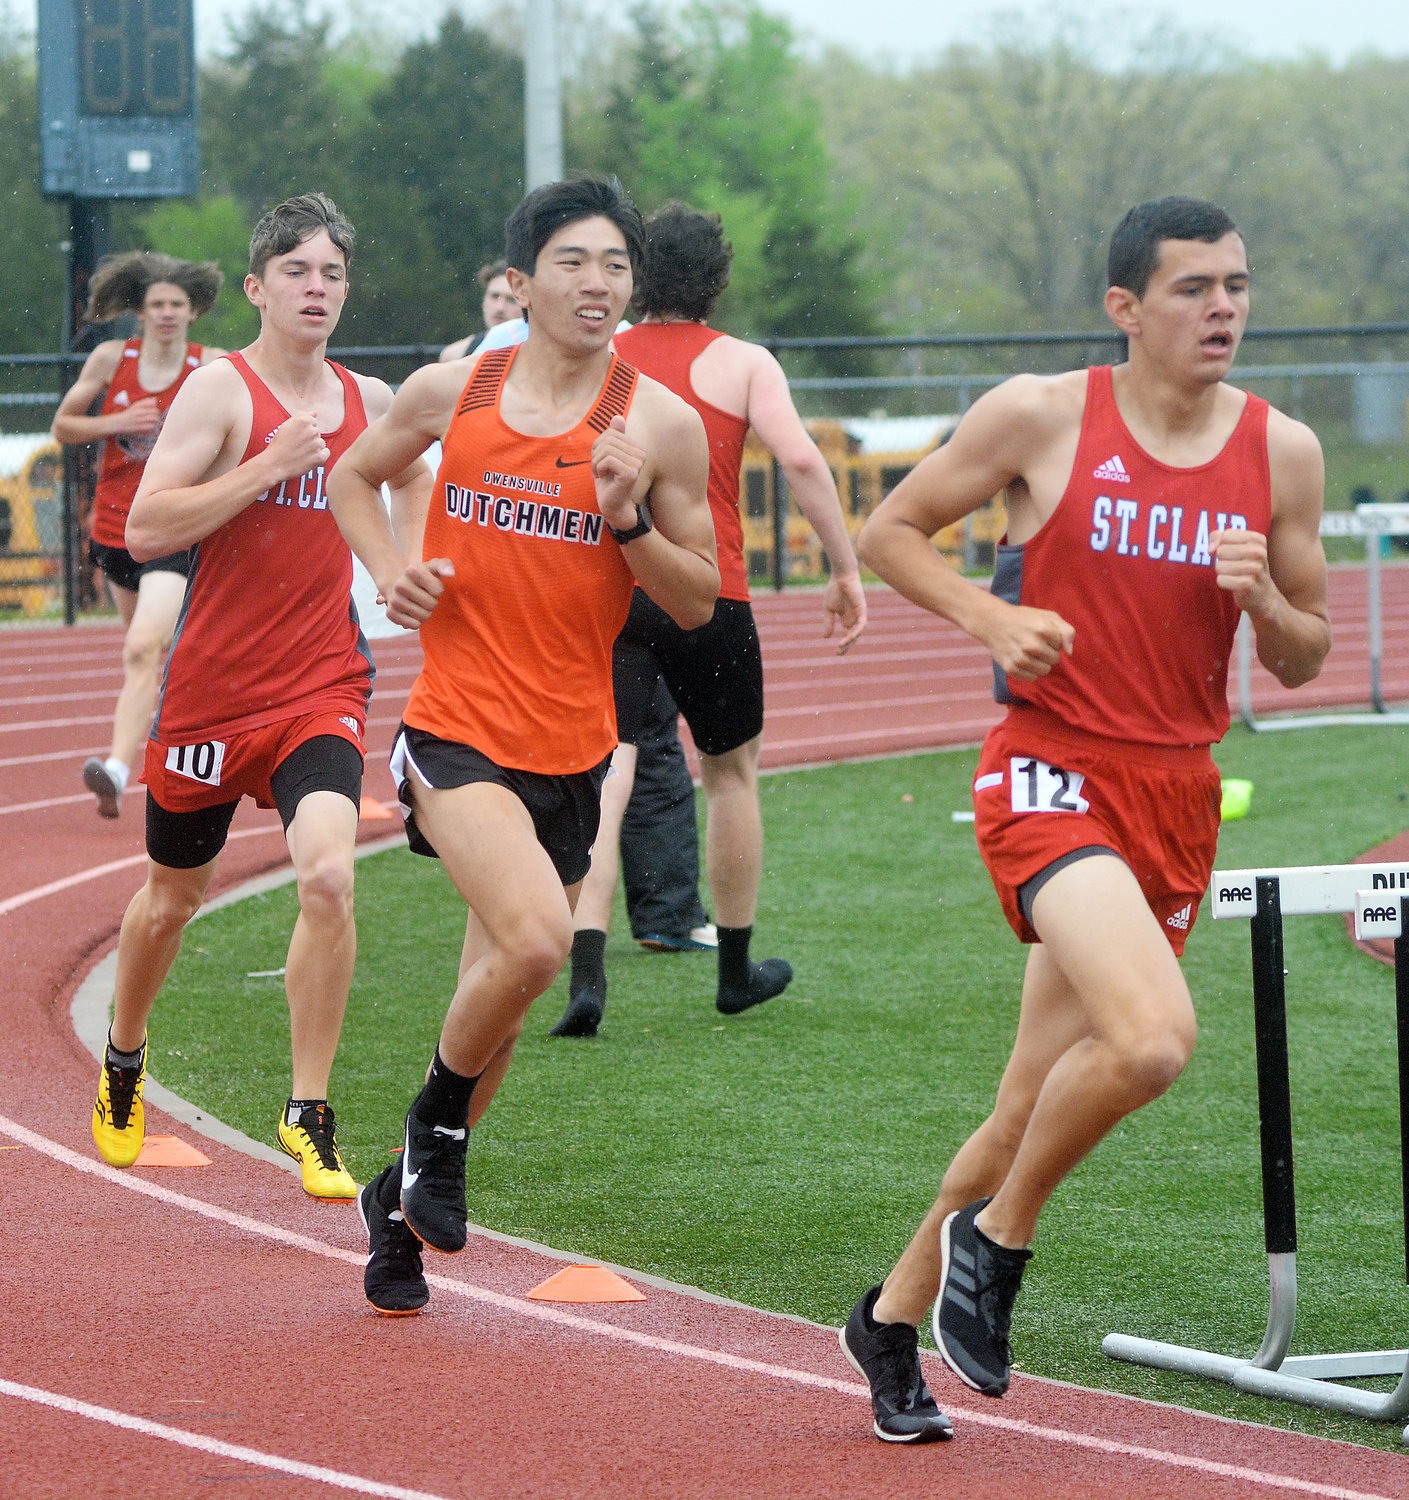 Freddy Zheng (second from left) also competed in the FRC Track Meet racing in the 1600m and 3200m runs. Zheng’s senior season ended following a fifth-place finish as part of the Dutchmen 4x800m relay team during the MSHSAA Class 3, District 5 Track Meet at West Plains High School hosted by Willow Springs High School.